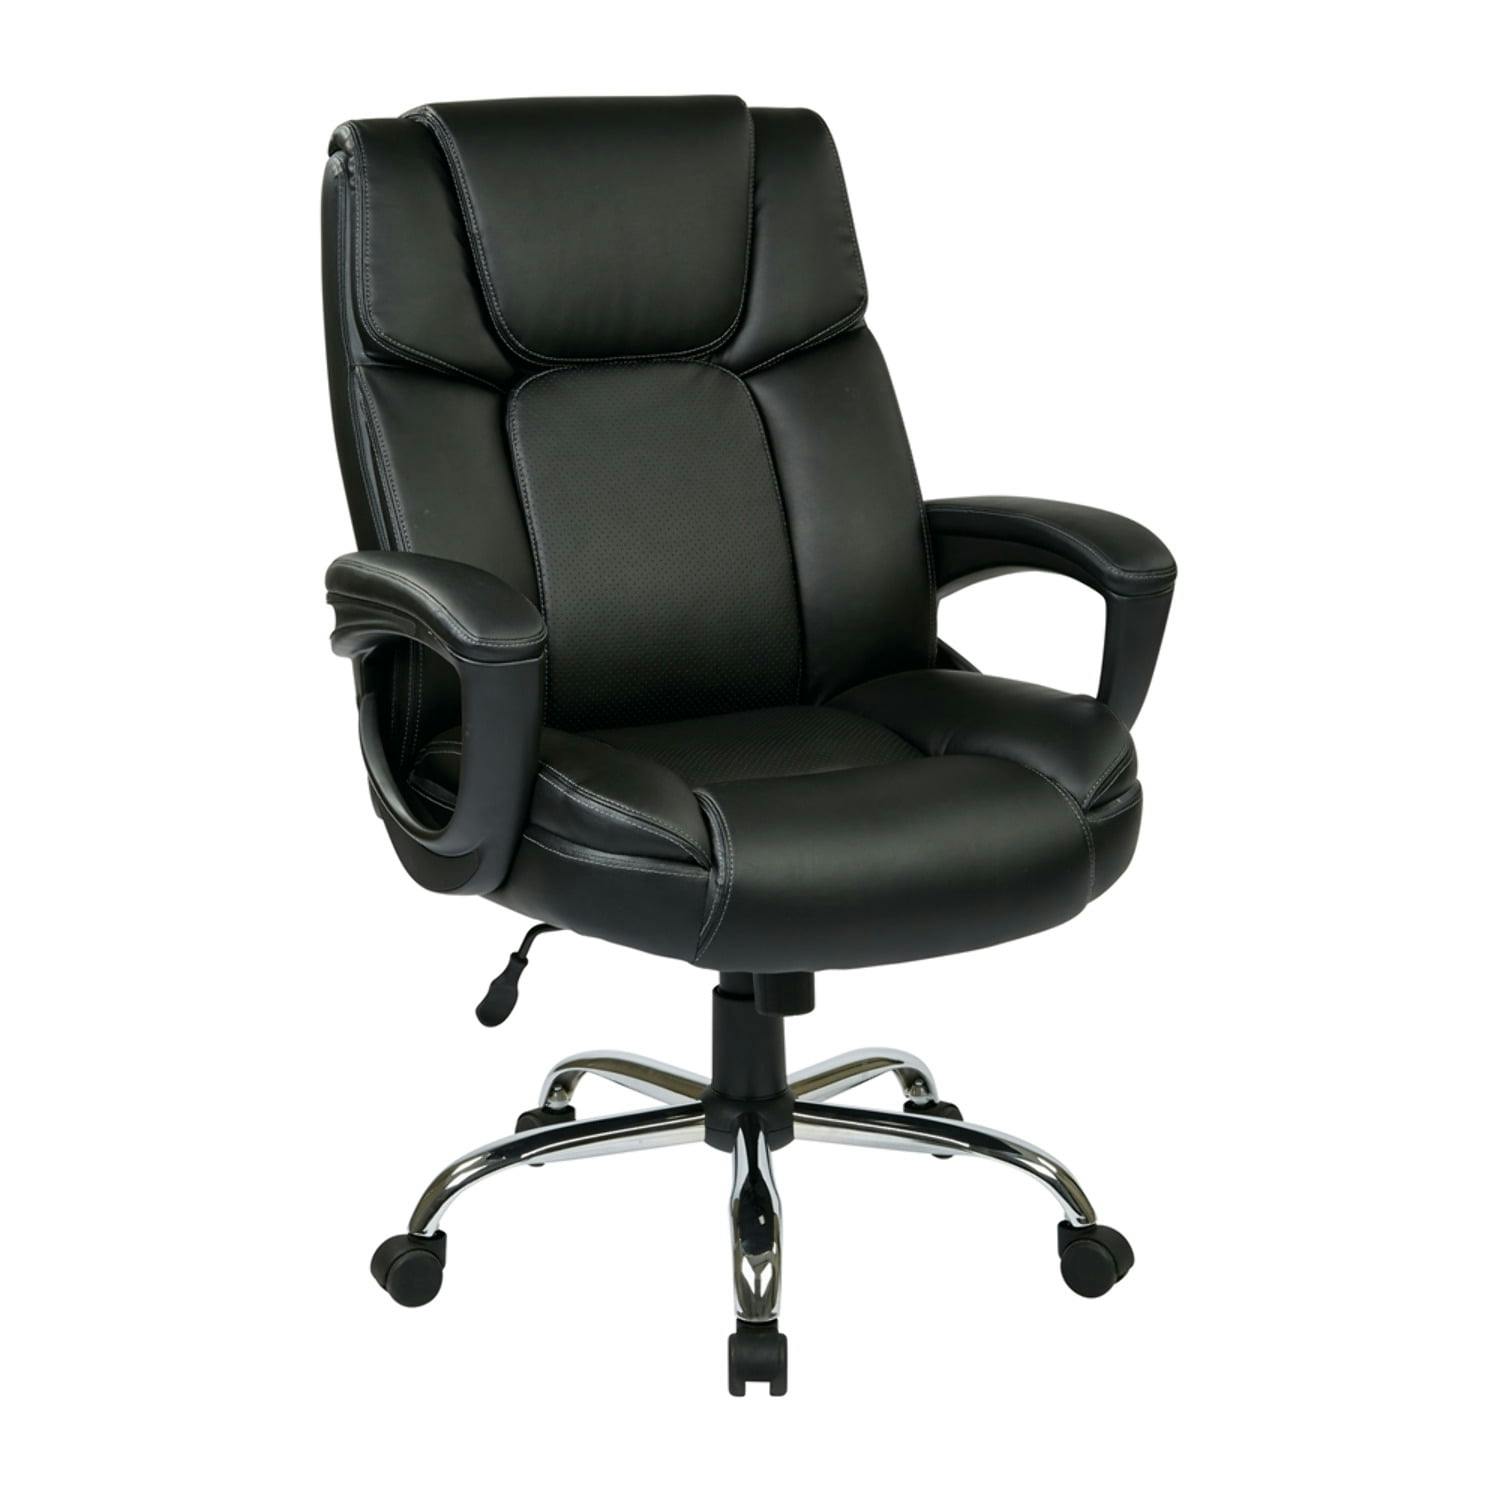 Luxury High-Back Black Leather Executive Swivel Chair with Chrome Base